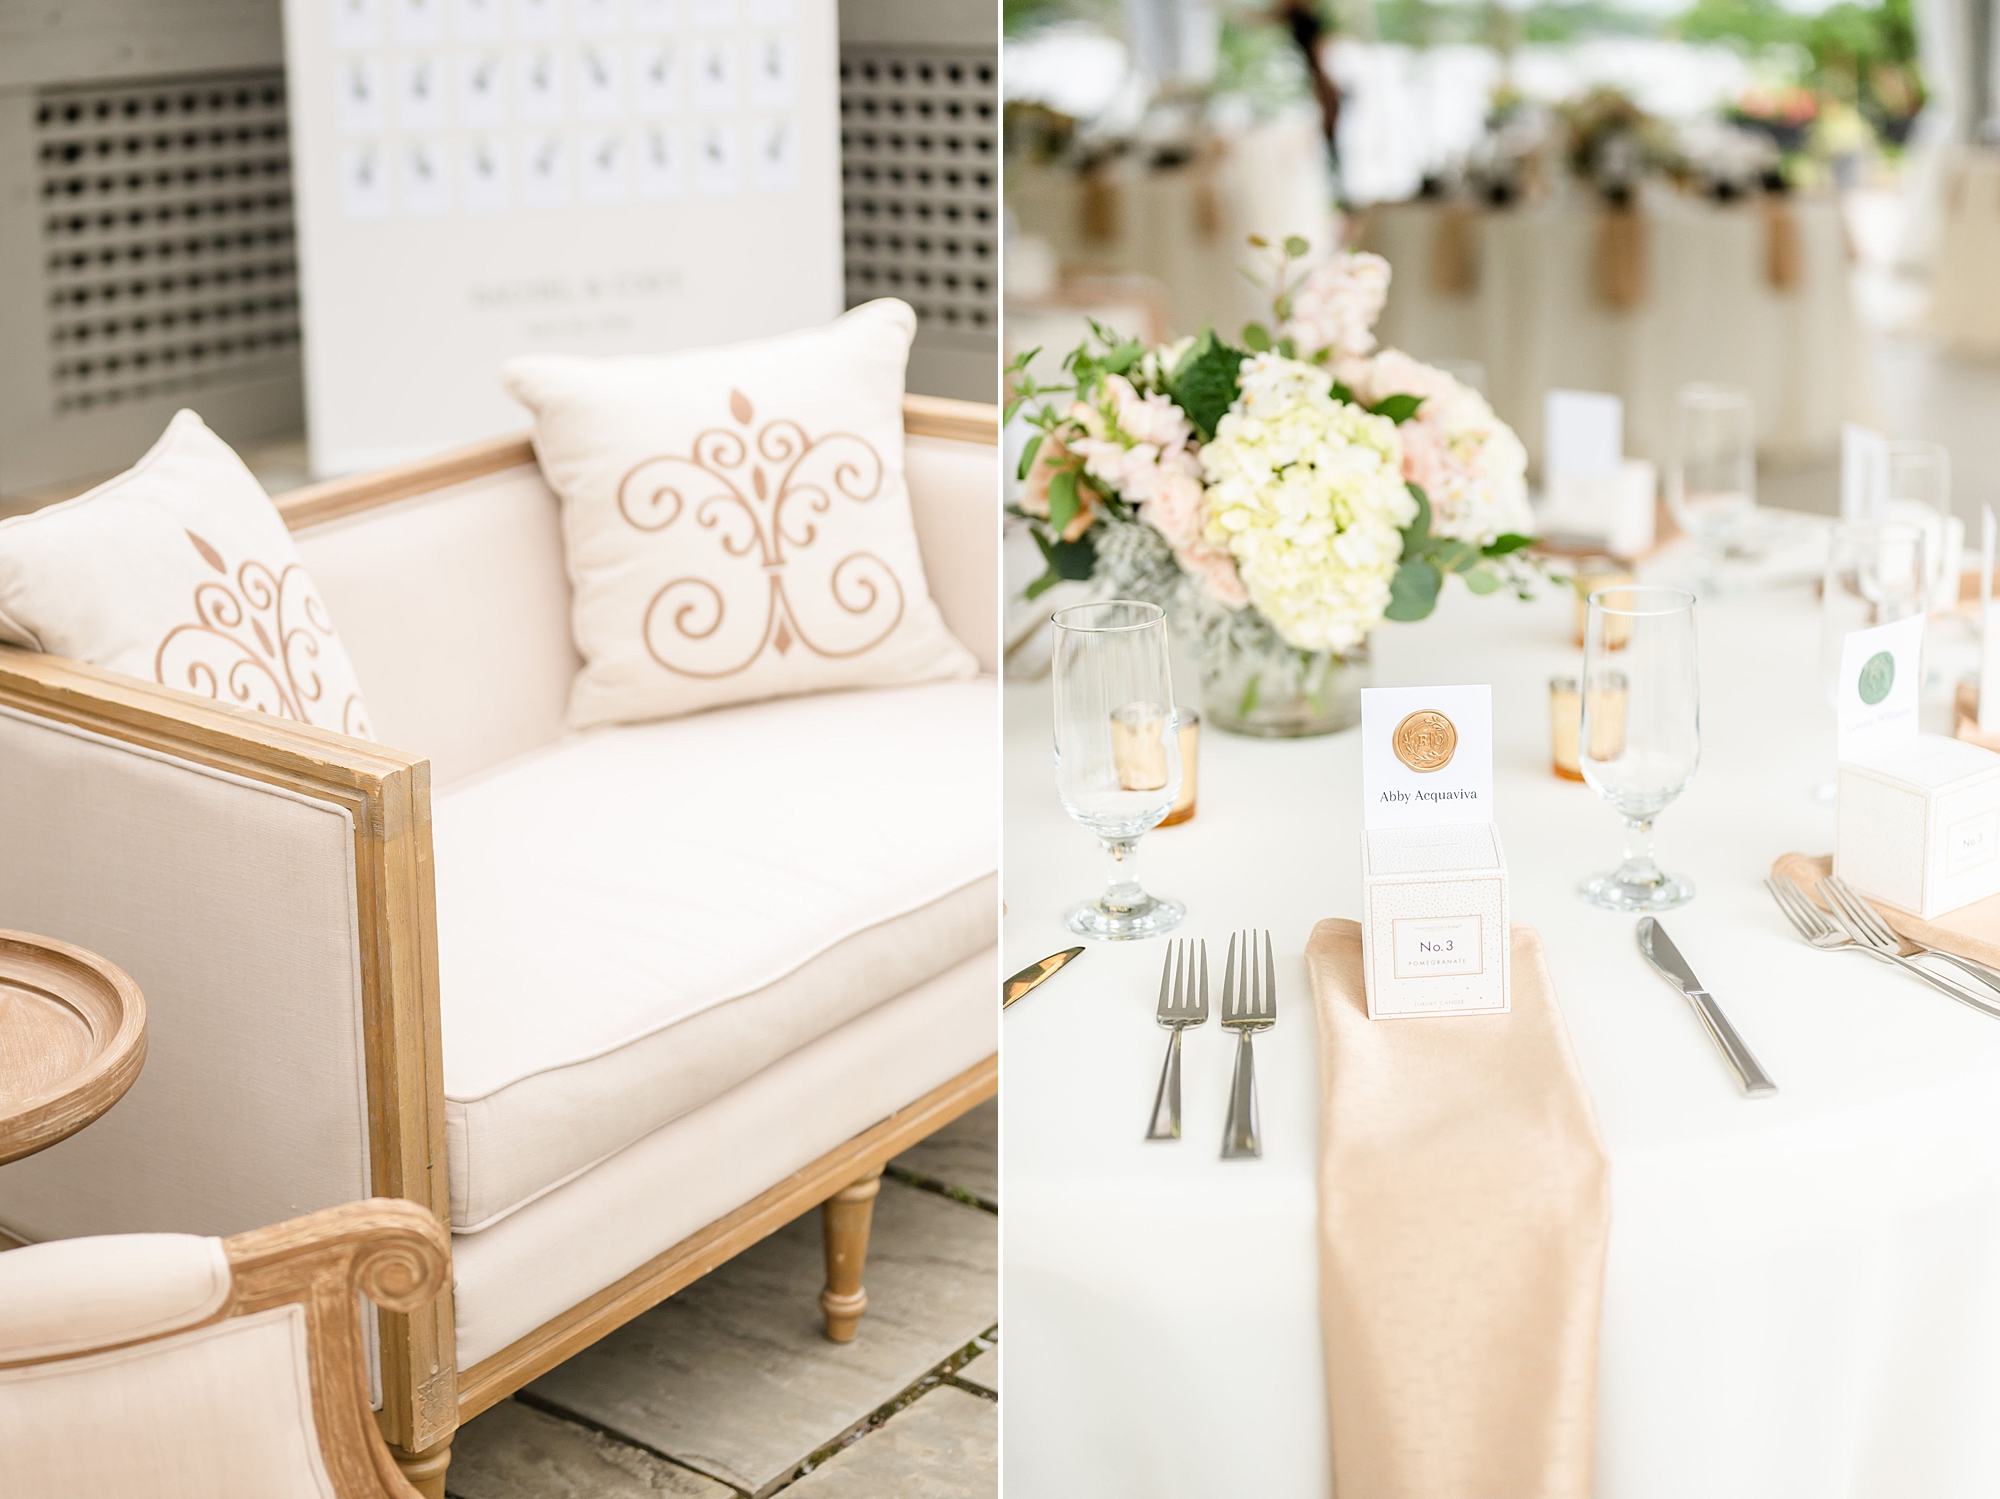 reception seating and blush details for reception at Londontown Gardens